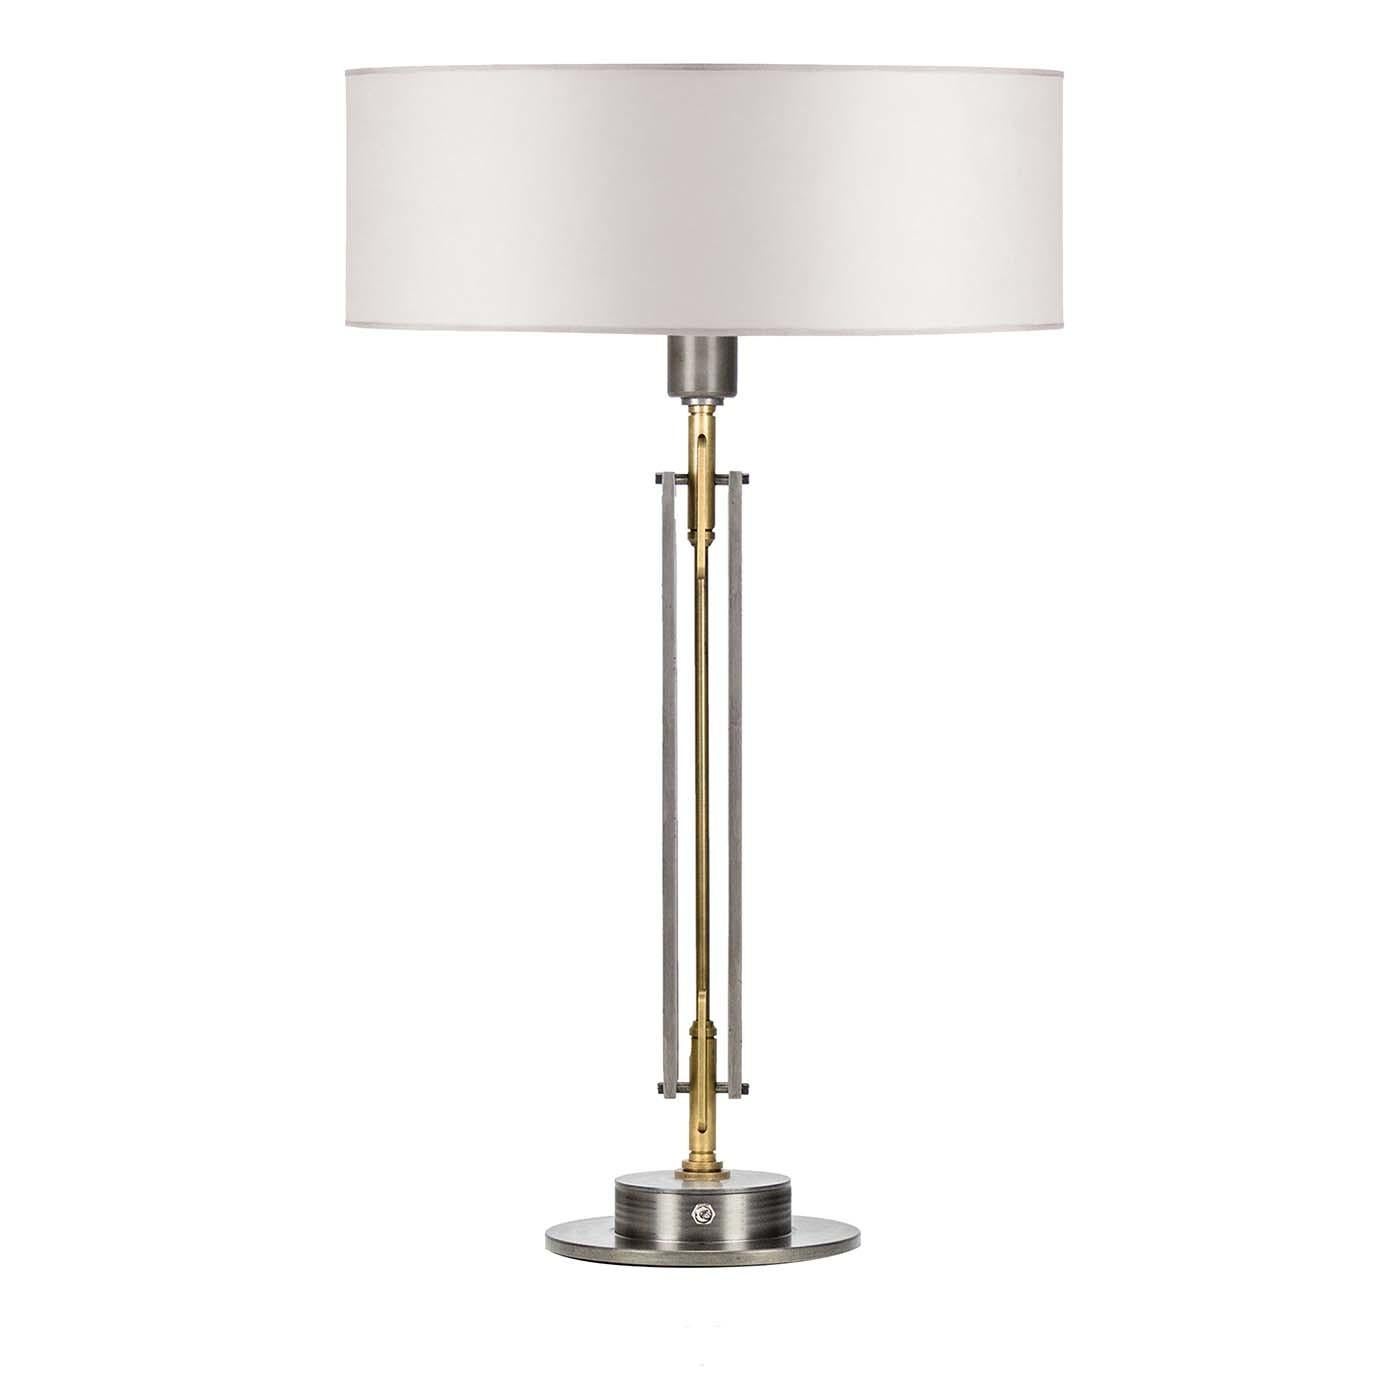 Featuring a sleek, modern design with a geometric silhouette and round base, this understated lamp brings a classic touch to any interior. The polished steel and brass of the structure lends a warm look that will suit any neutral color palette with